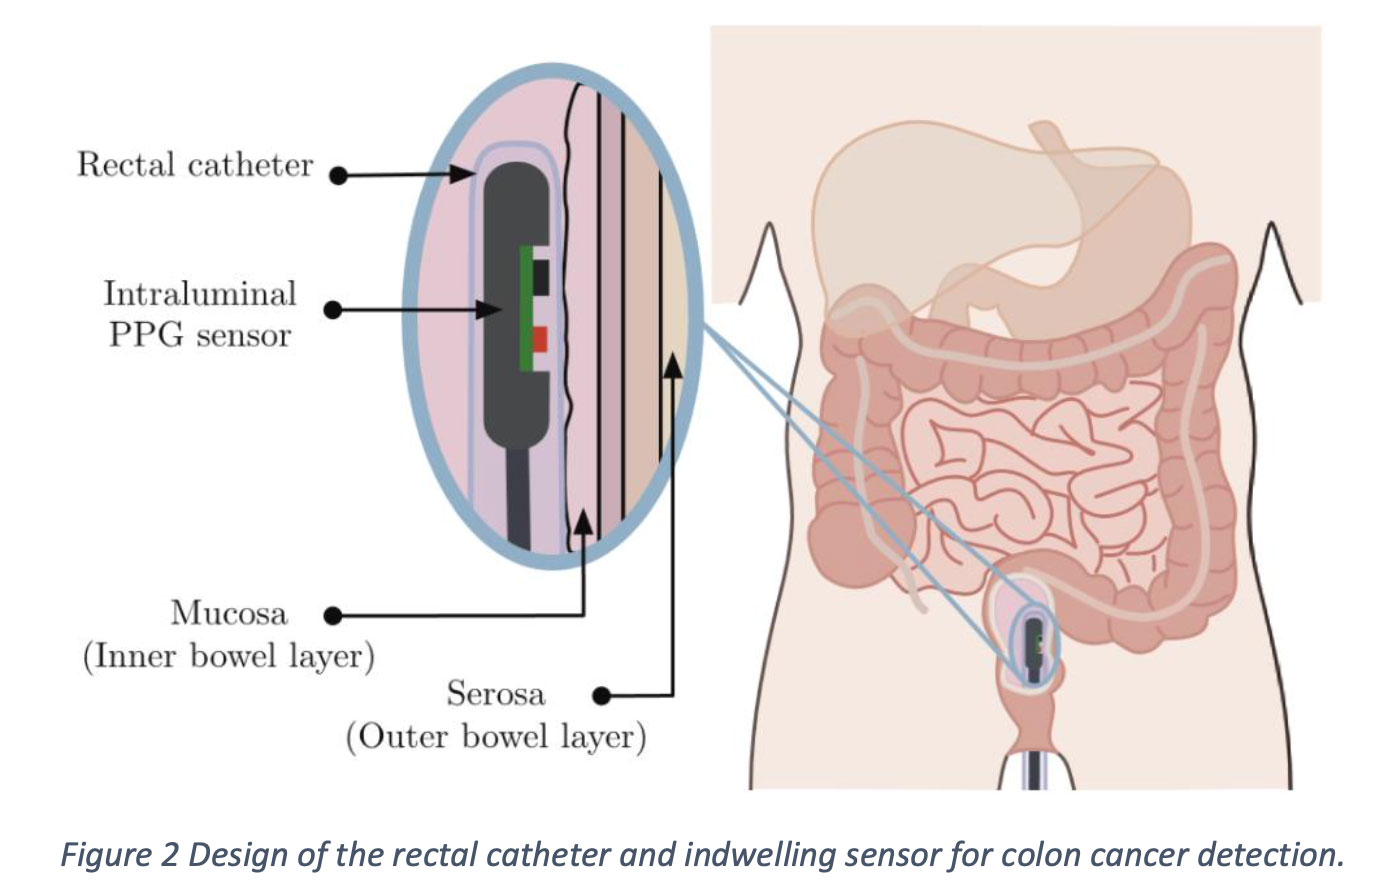 Design of the rectal catheter and indwelling sensor for colon cancer detection